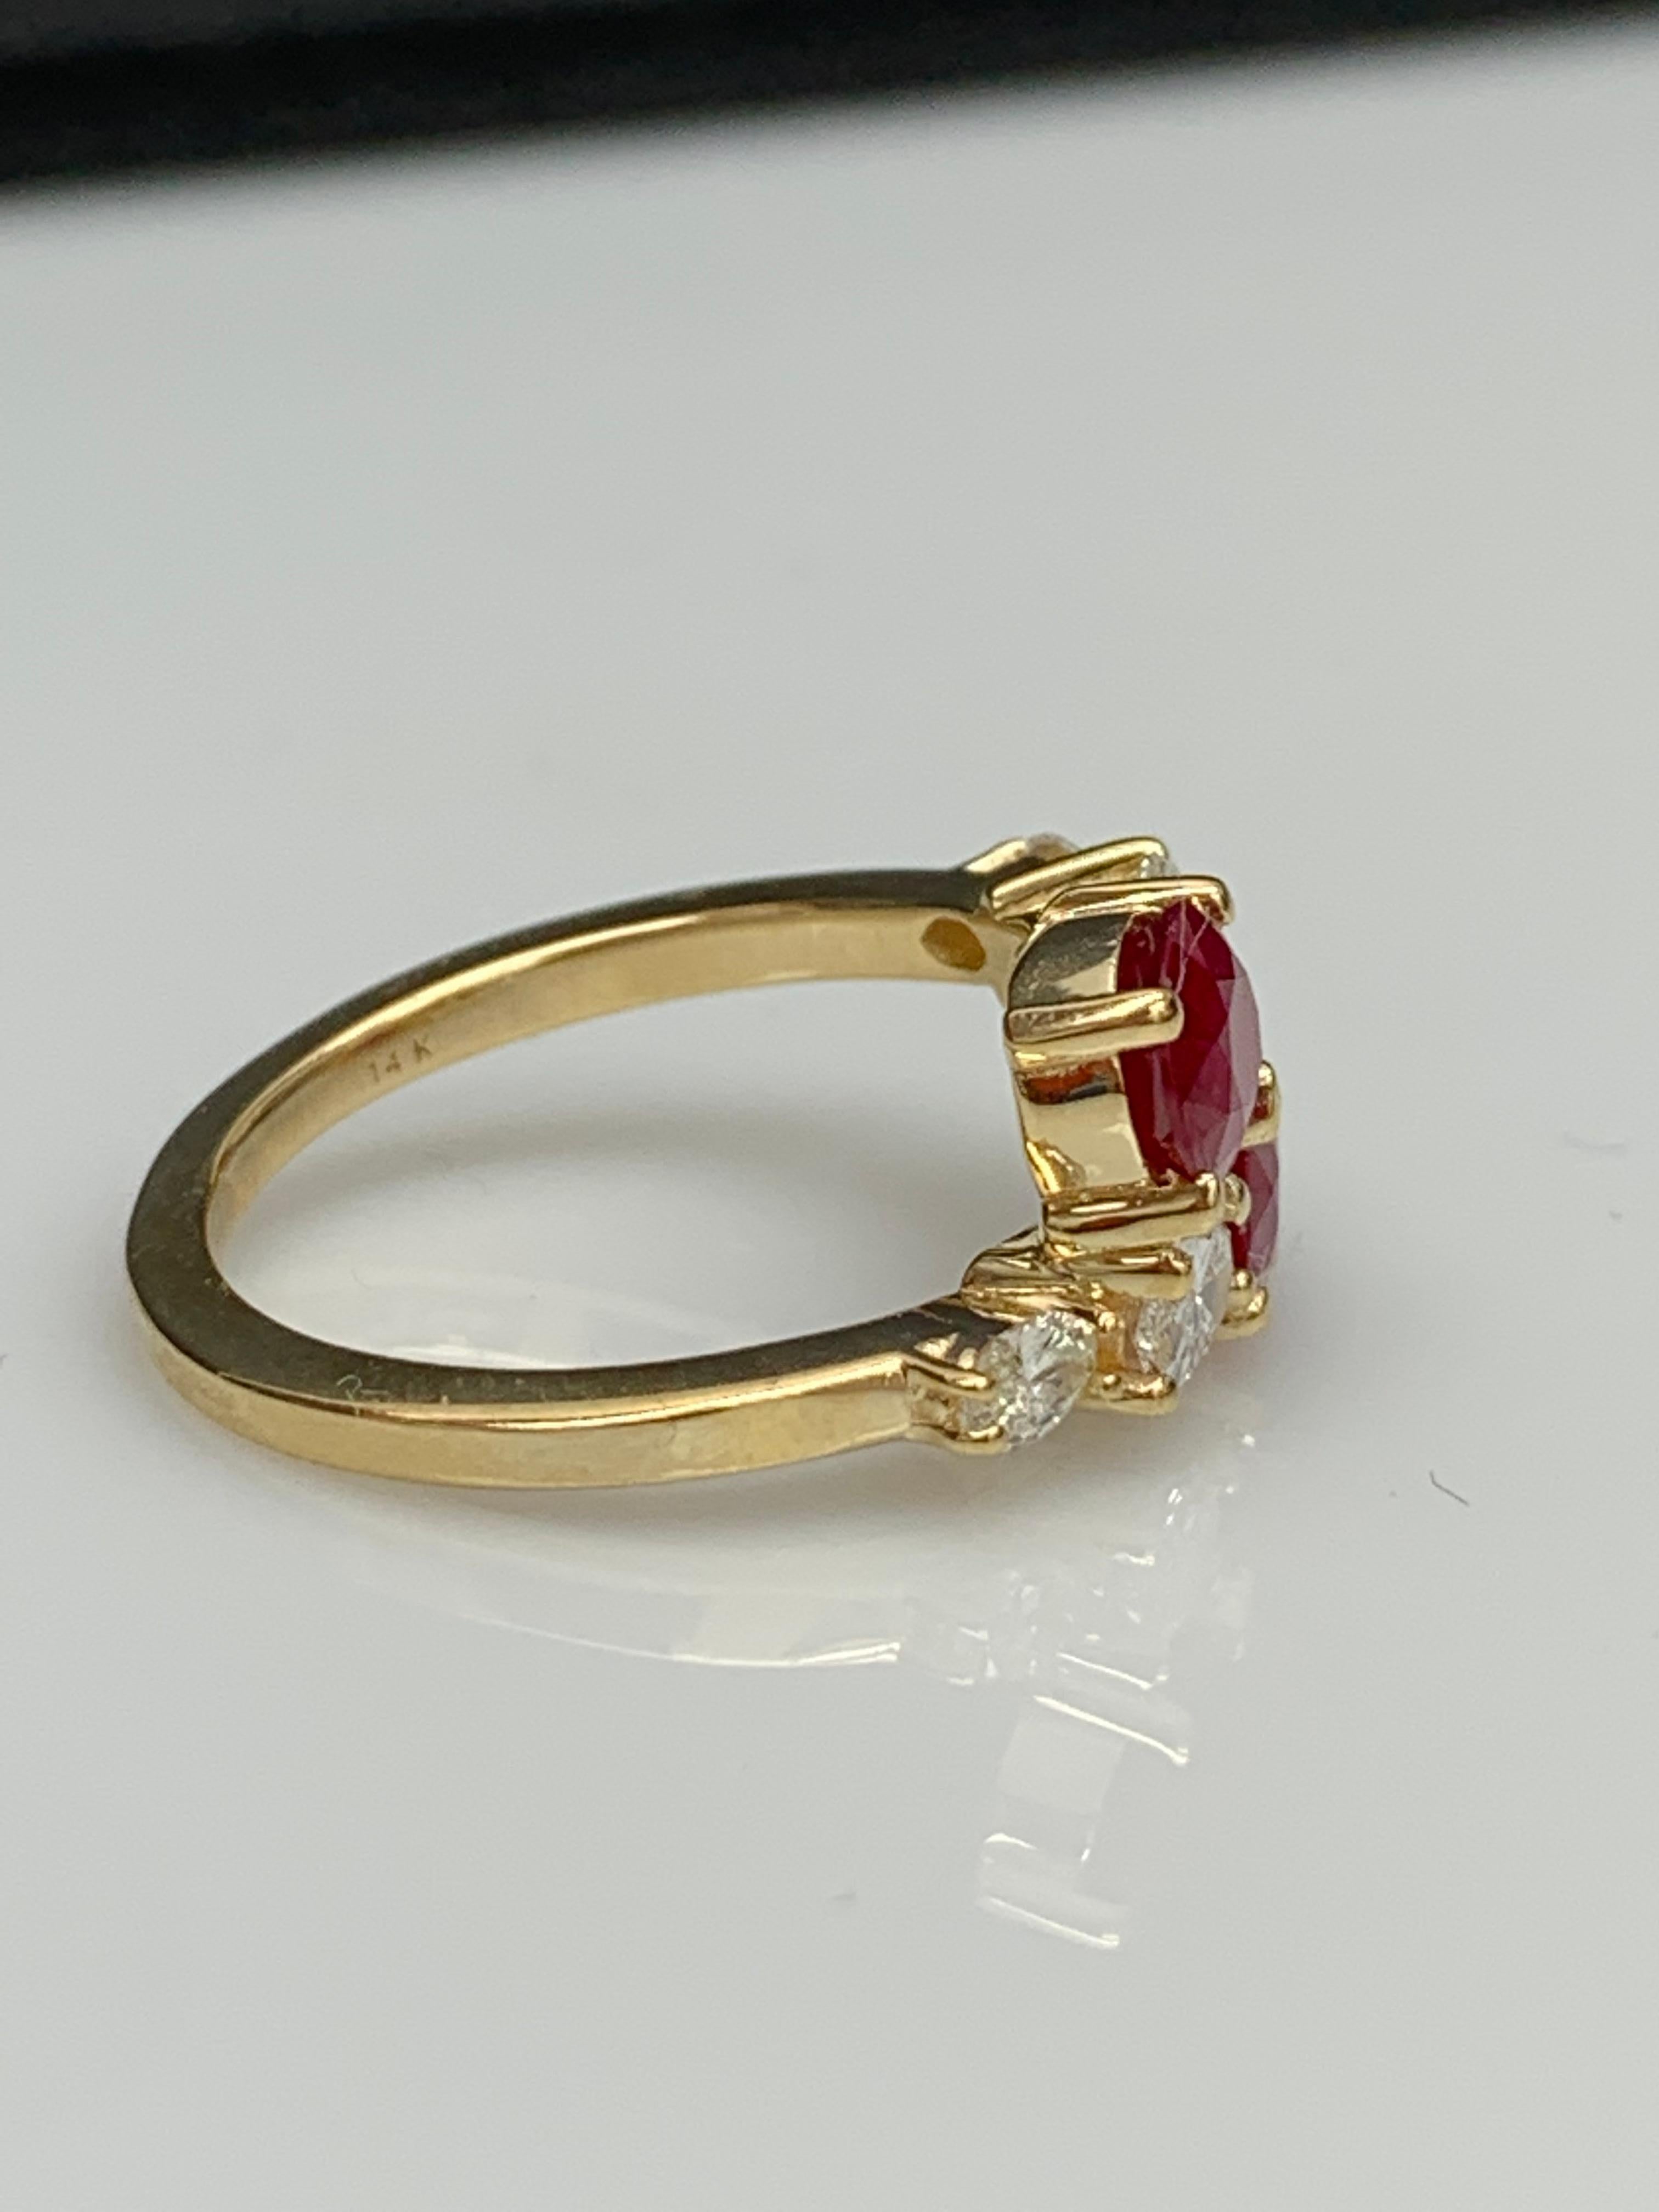 2.18 Carat Oval Cut Ruby Diamond Toi et Moi Engagement Ring in 14K Yellow Gold For Sale 10